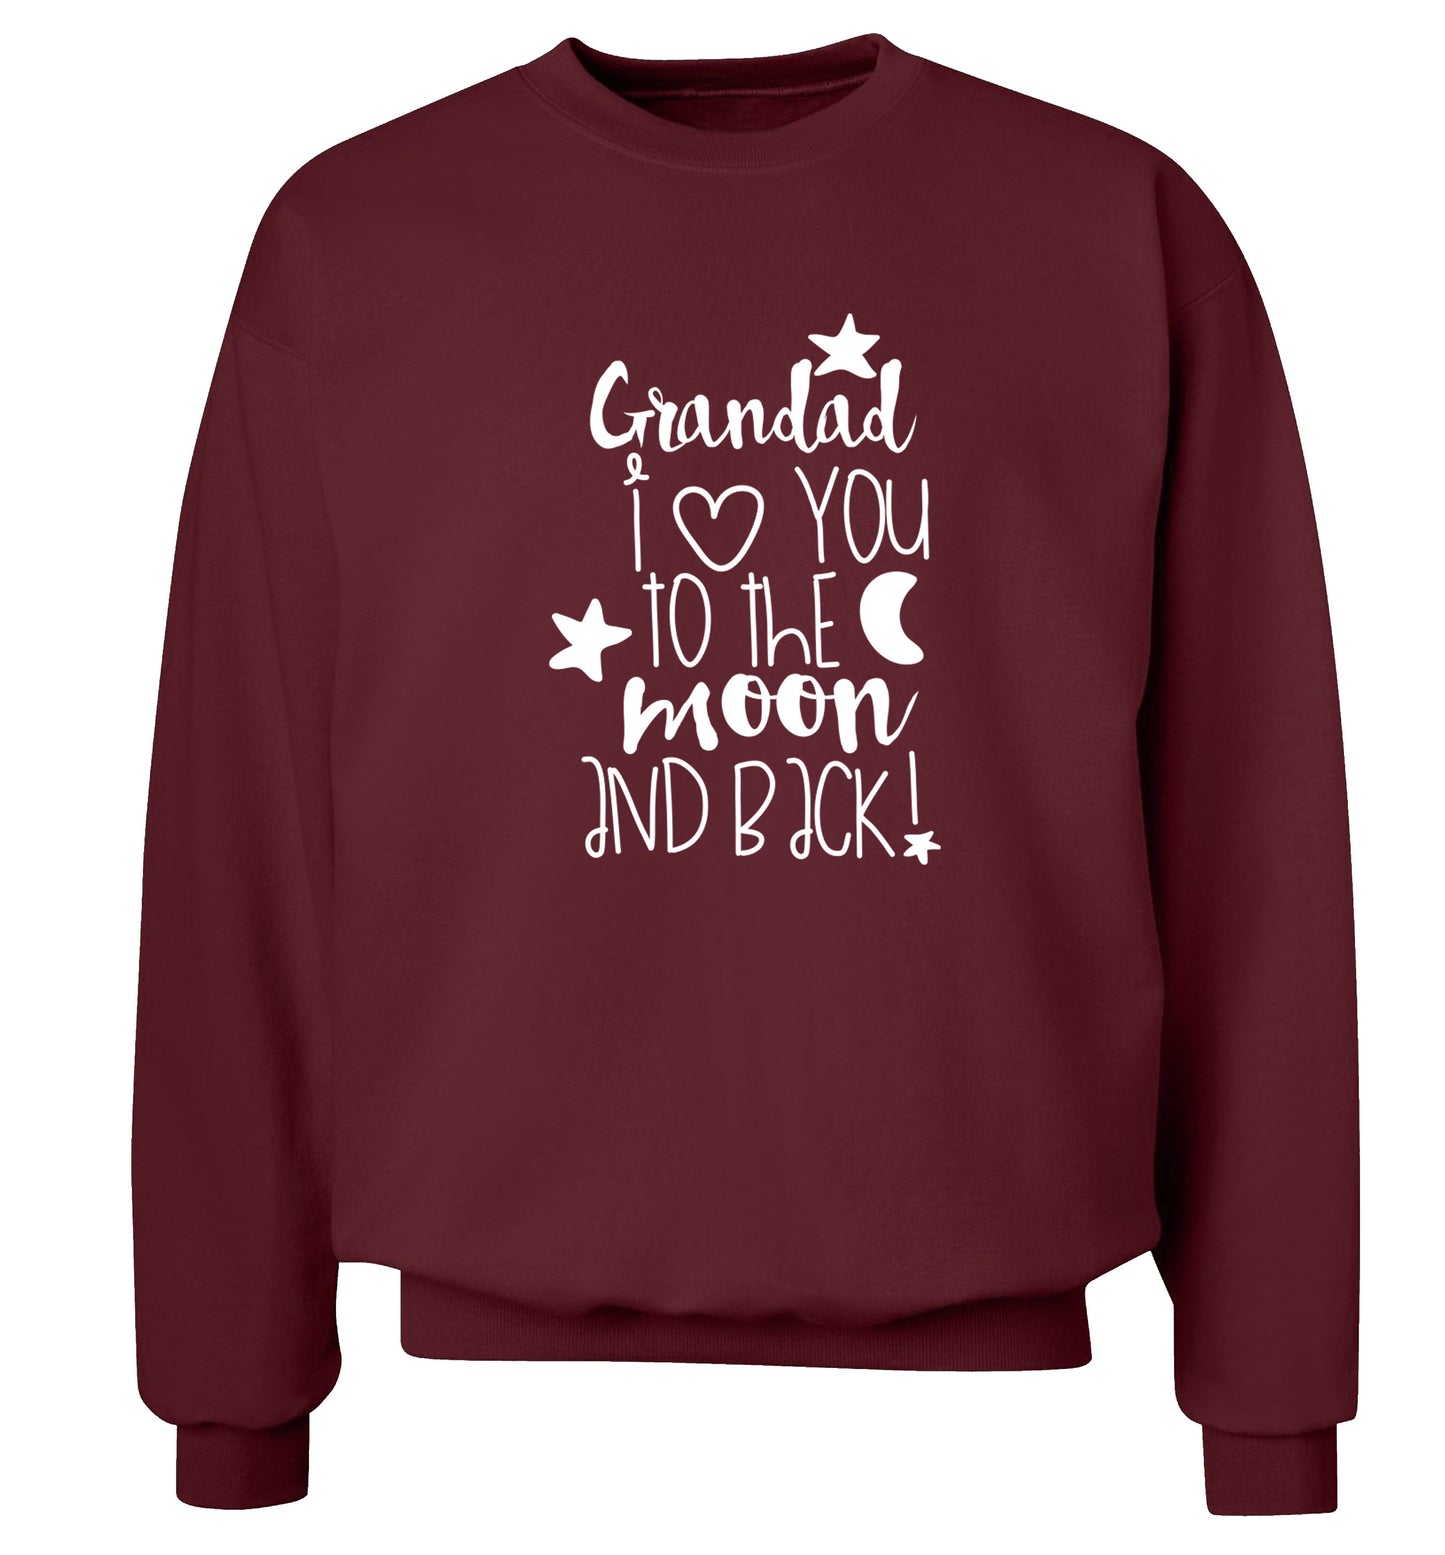 Grandad's I love you to the moon and back Adult's unisex maroon  sweater 2XL